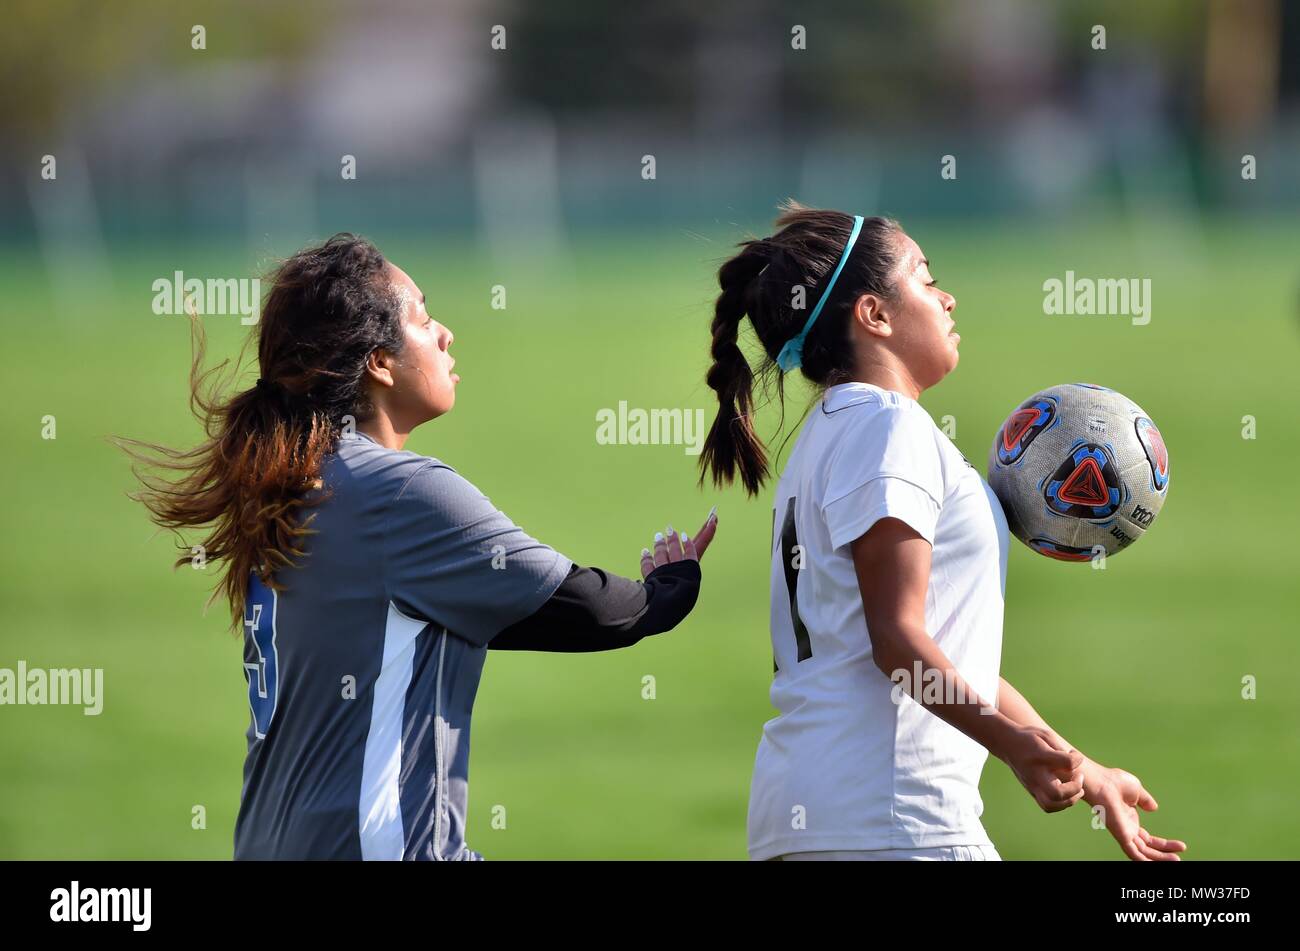 High school midfielder playing a ball off her body in front of an opponent during a conference match. USA. Stock Photo